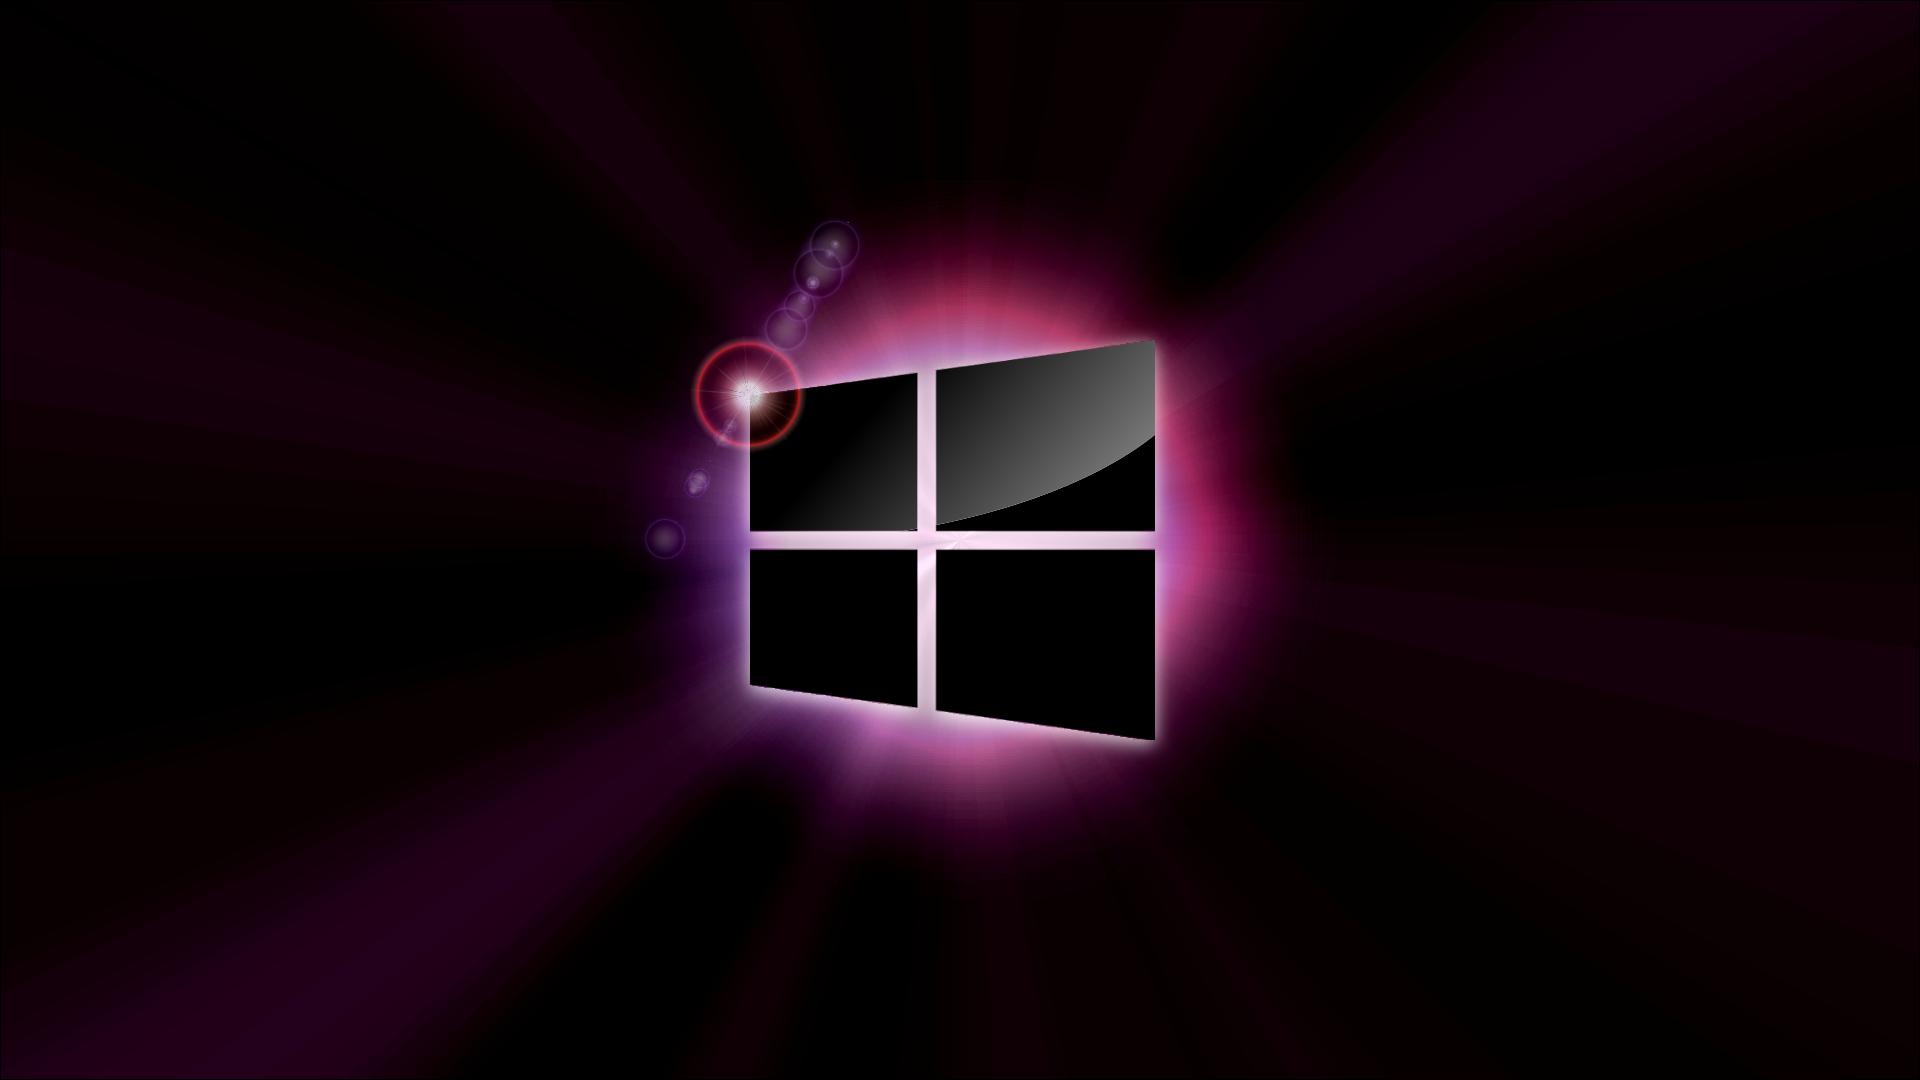 Windows 8 Wallpapers High Quality - Wallpaper Cave